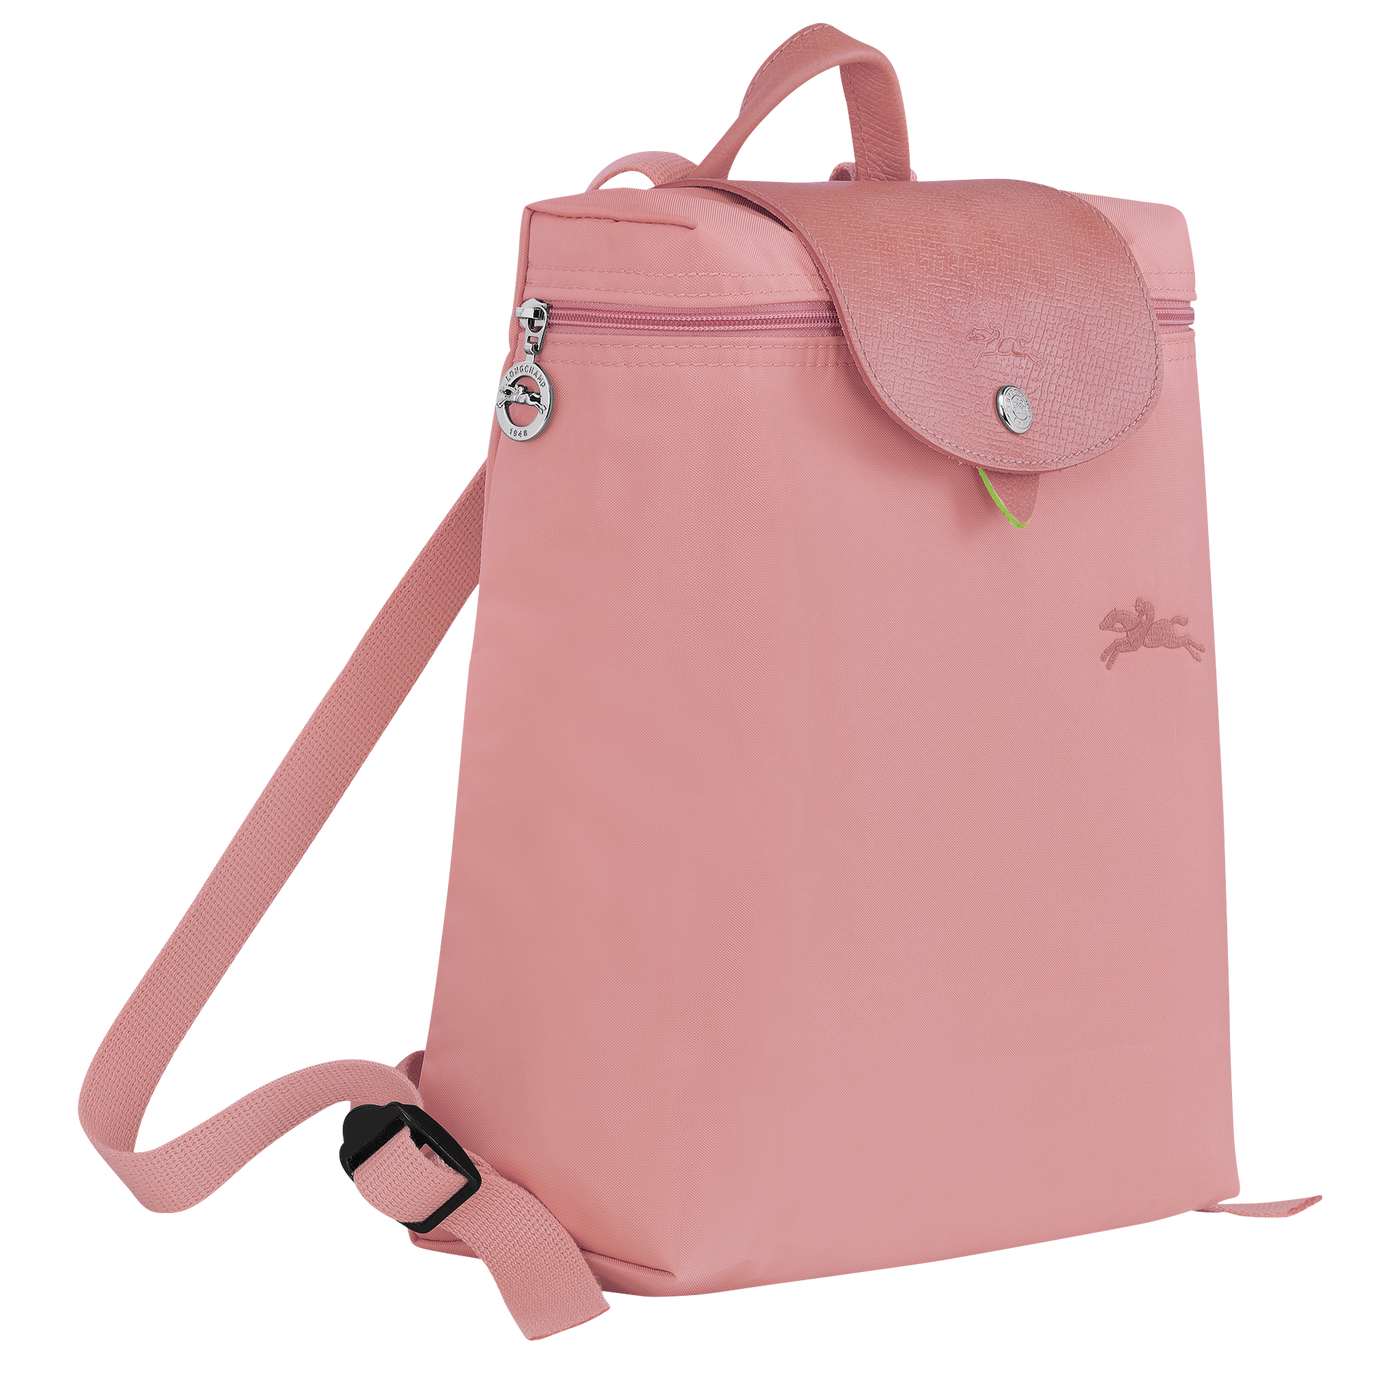 Le Pliage Green Backpack - L1699919